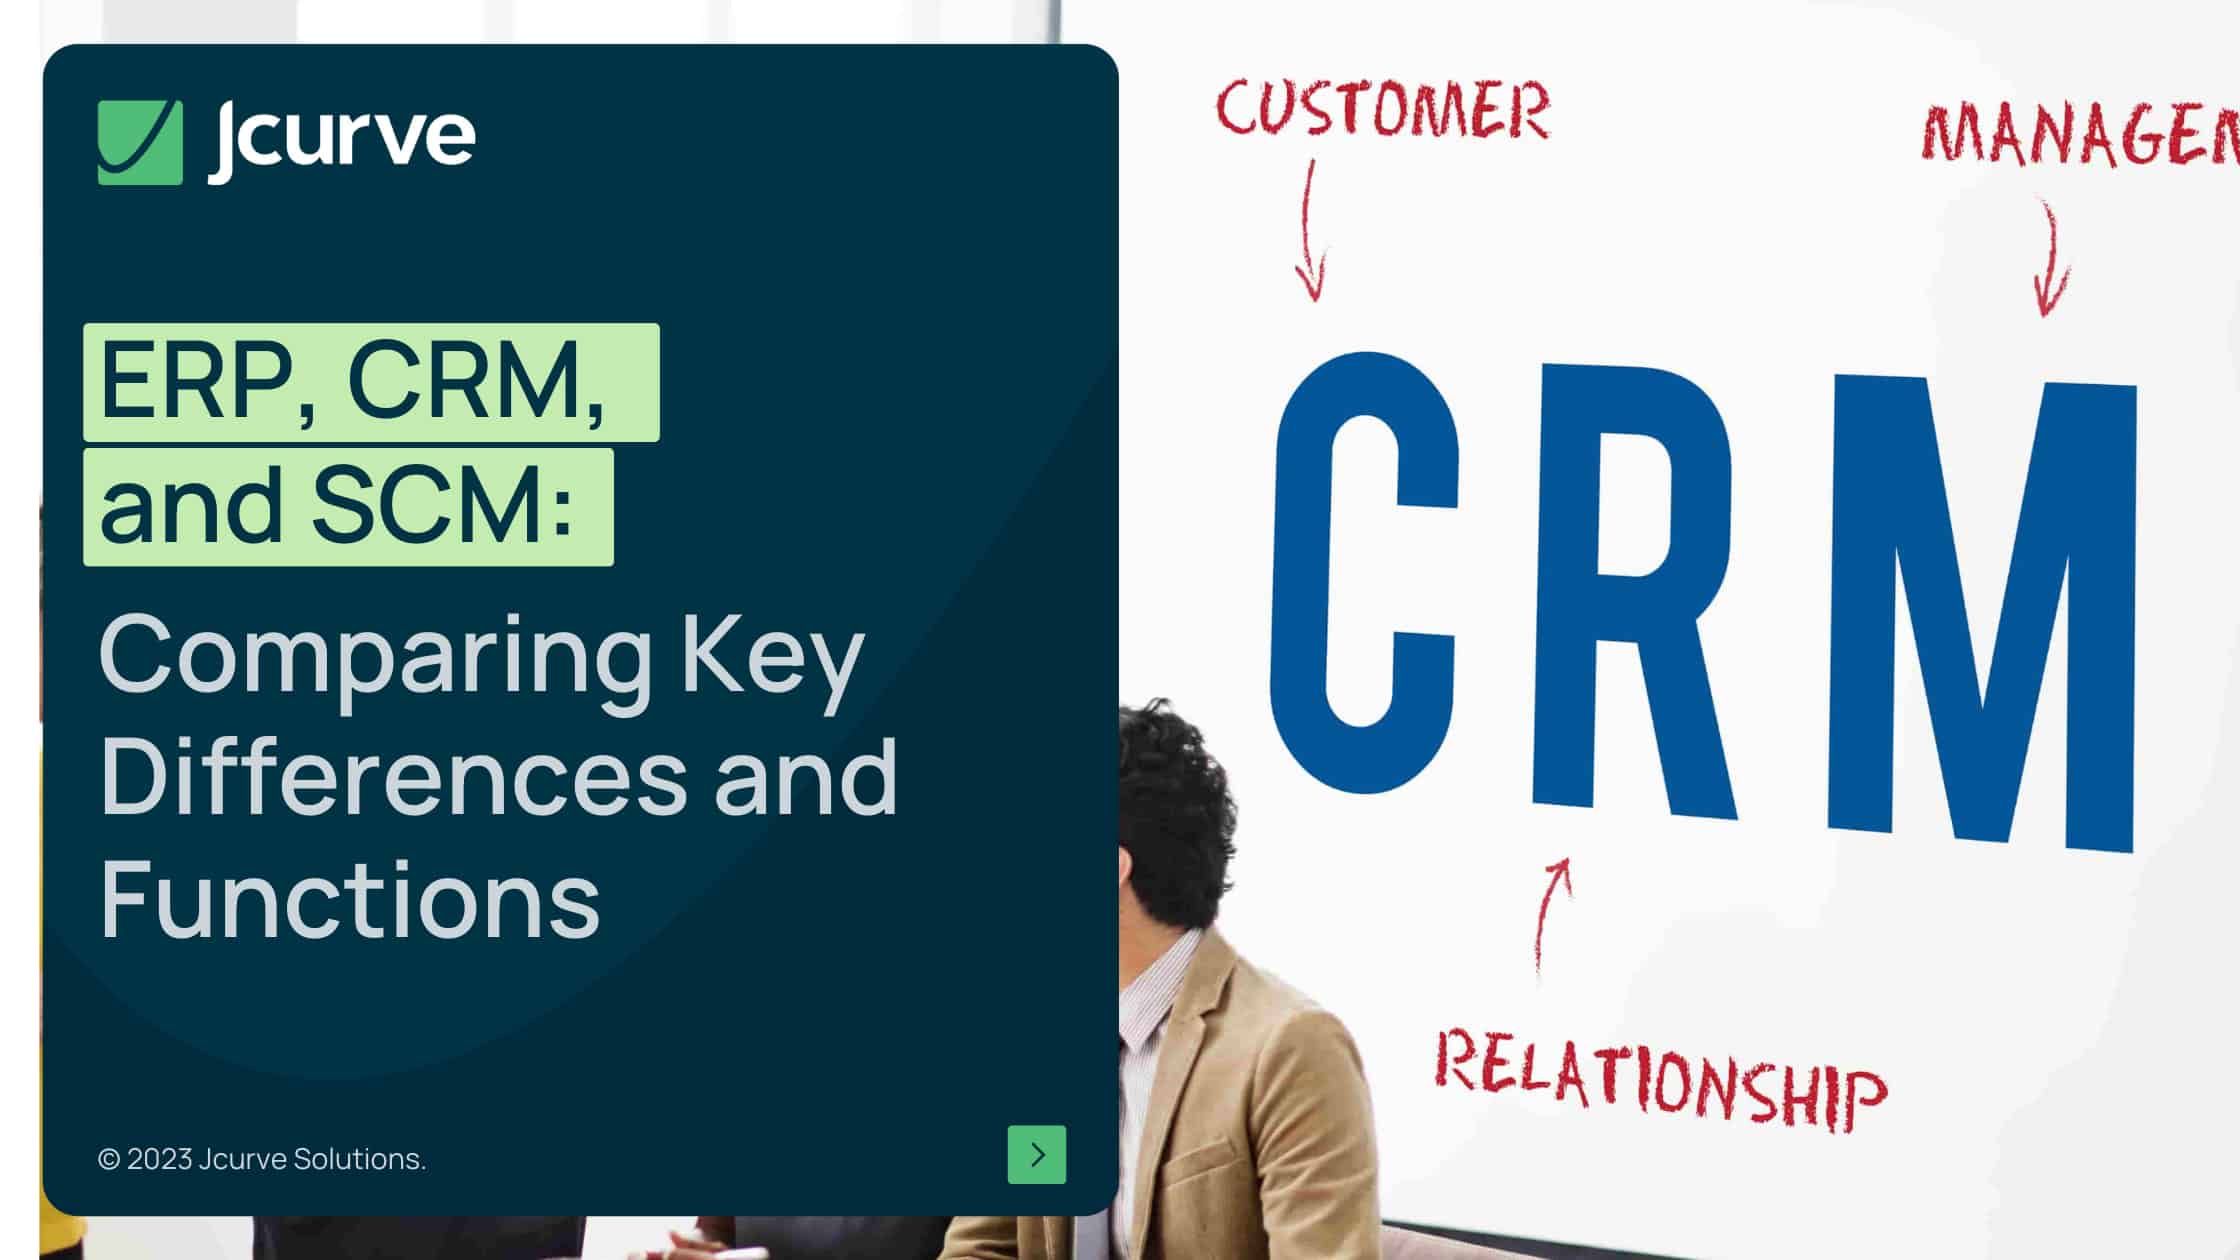 ERP, CRM, and SCM: Comparing Key Differences and Functions